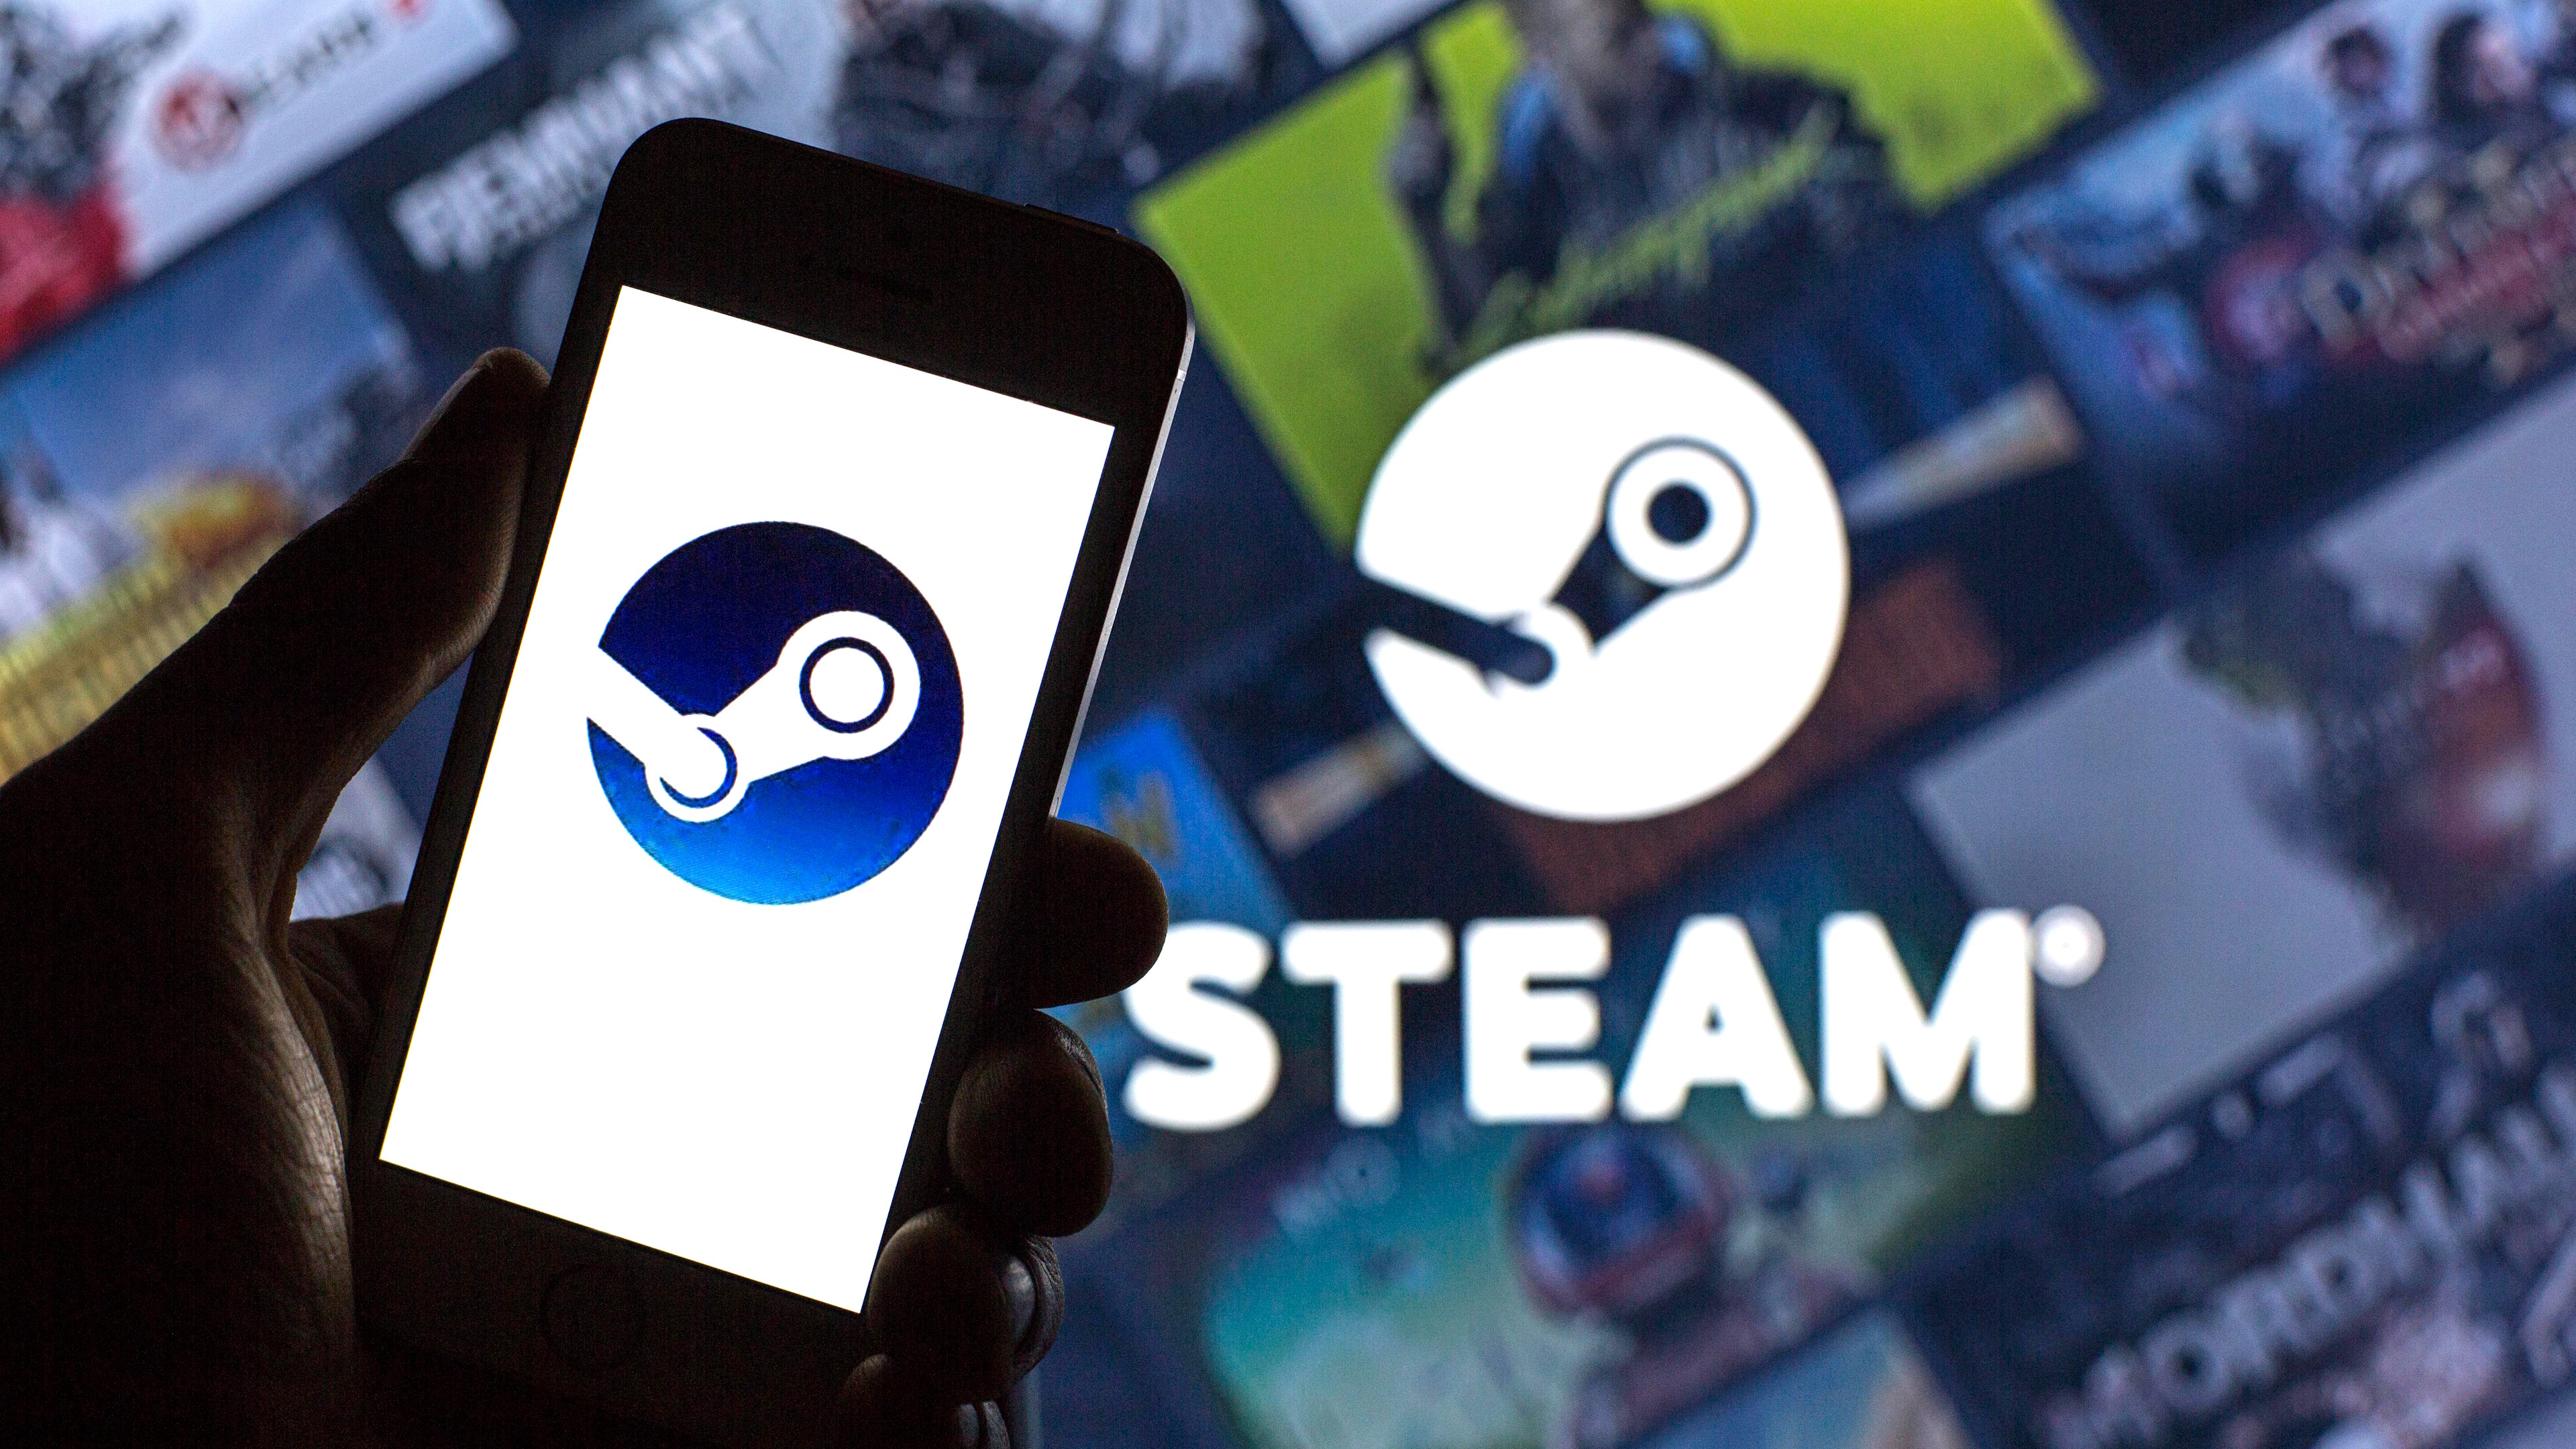 Today is the end of Steam': Argentina and Turkey floored by new Steam price  hikes as high as 2900%